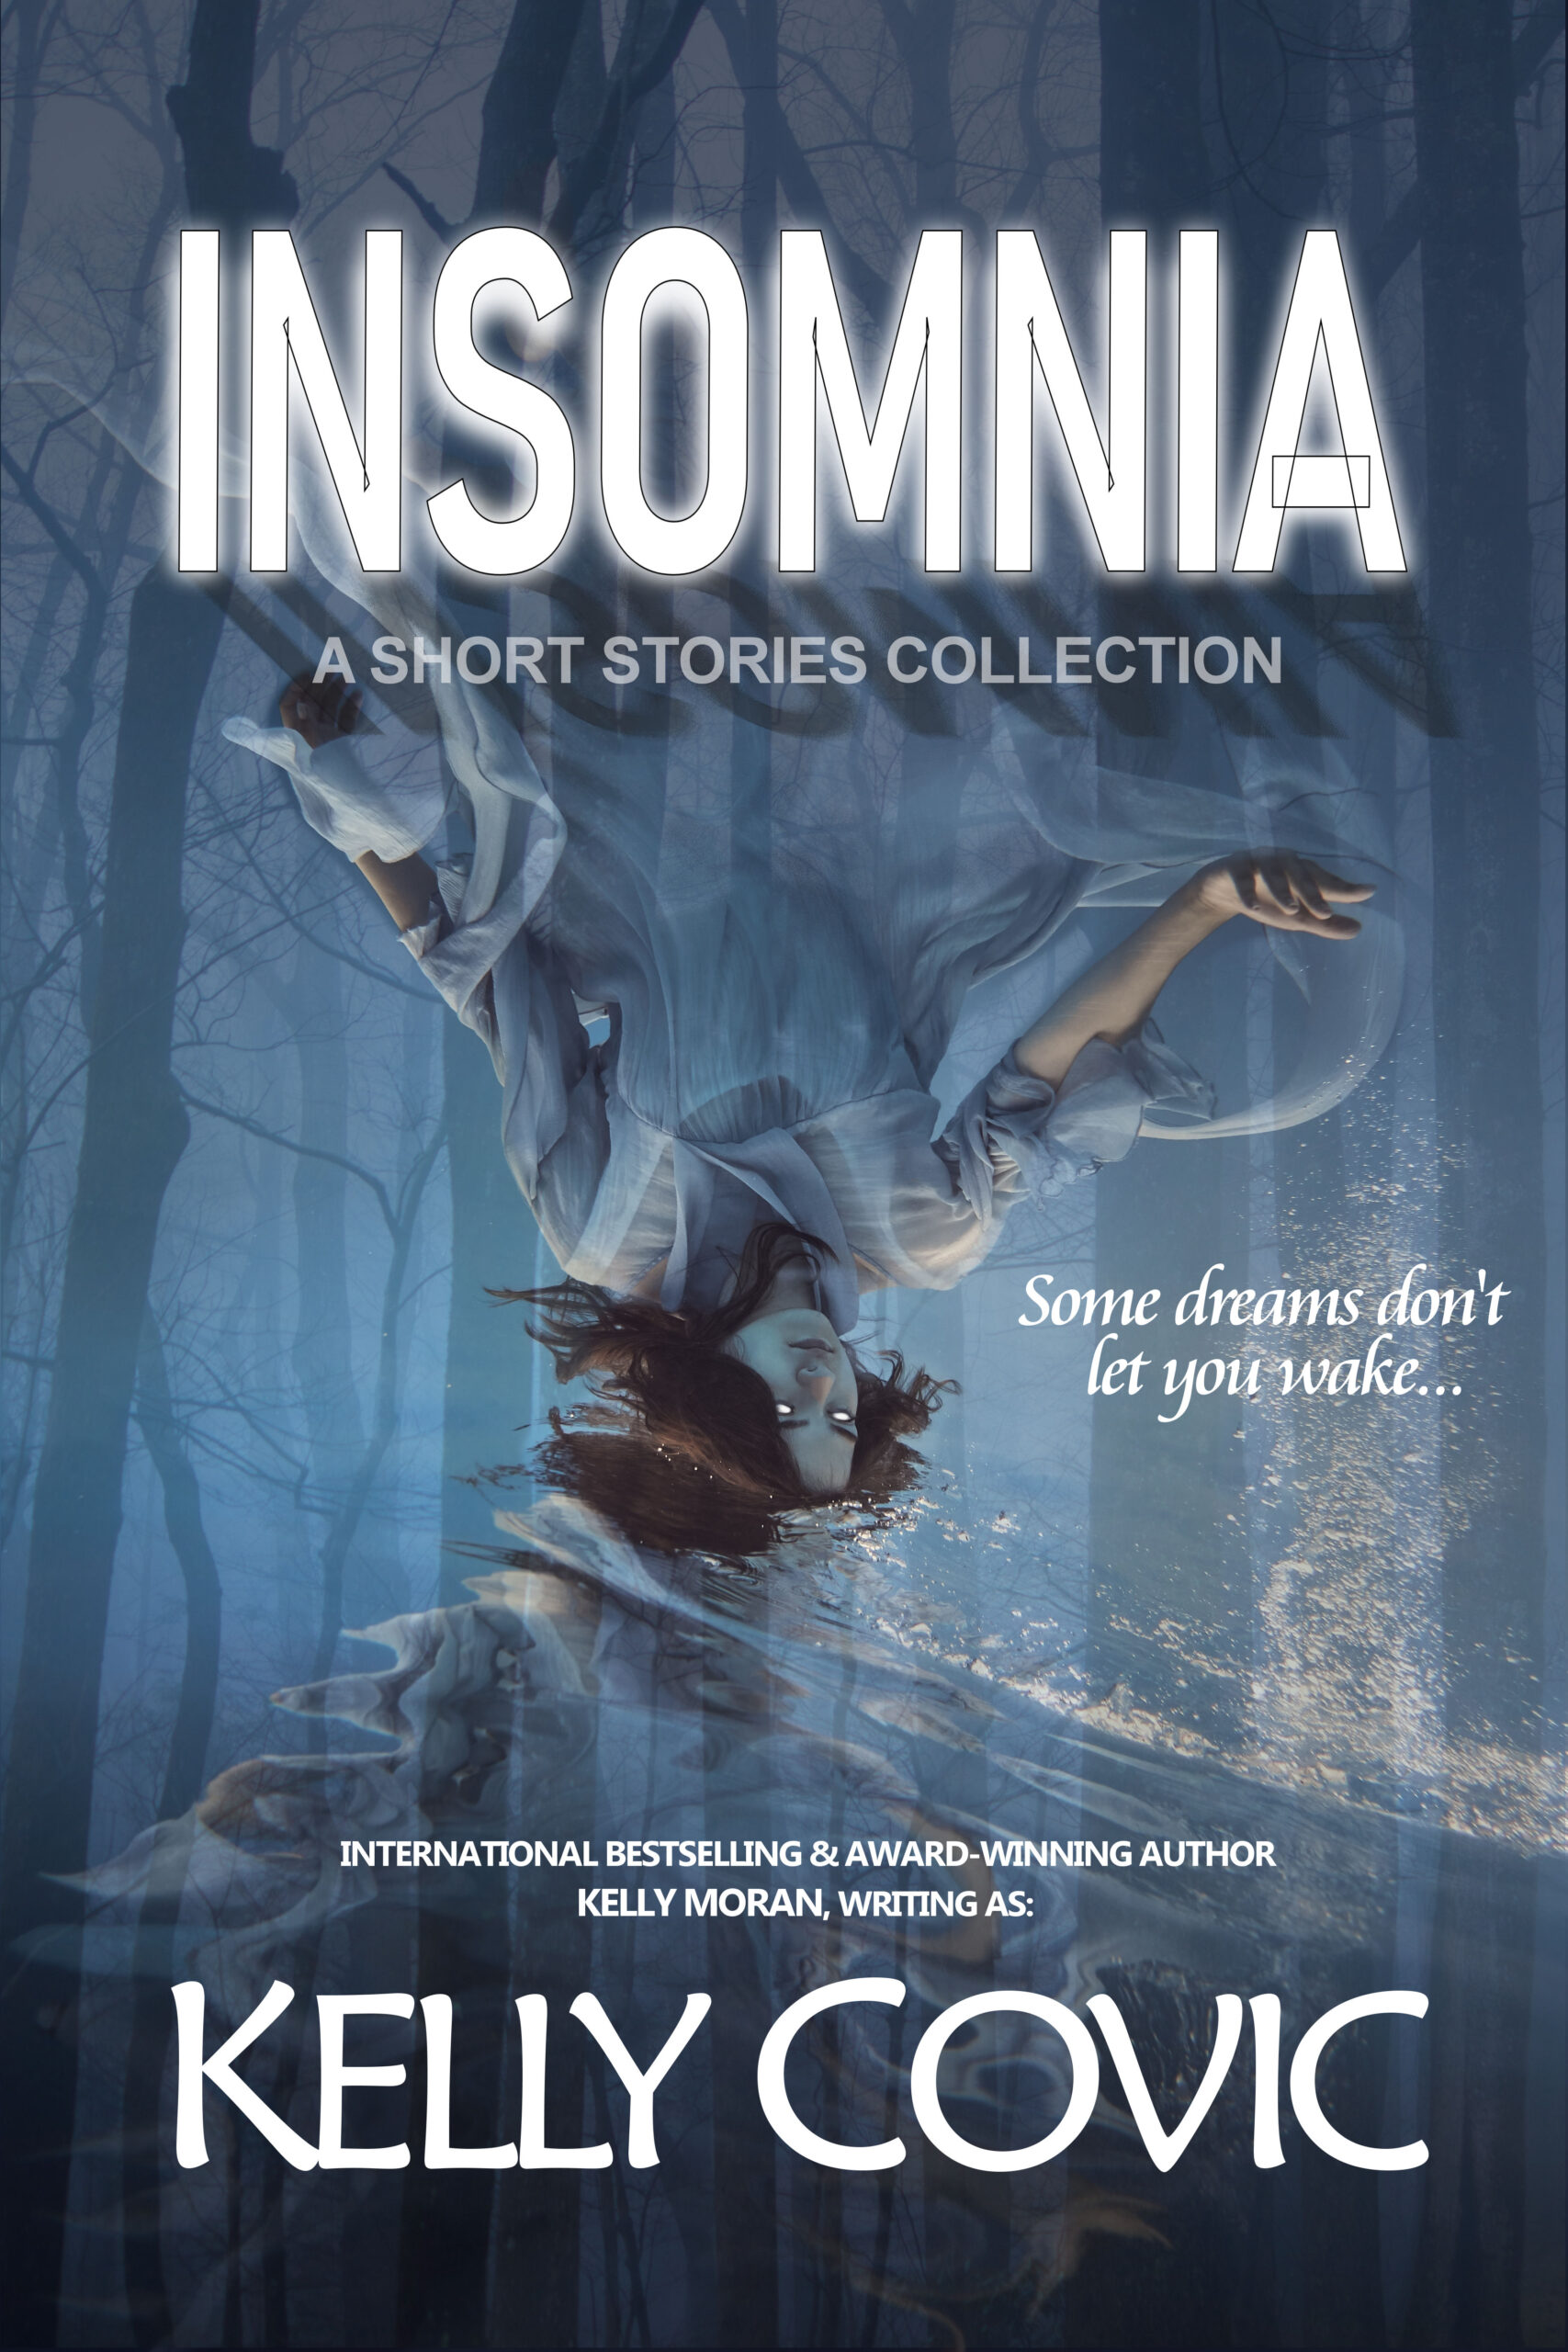 
					Cover art from "Insomnia" by Kelly Covic